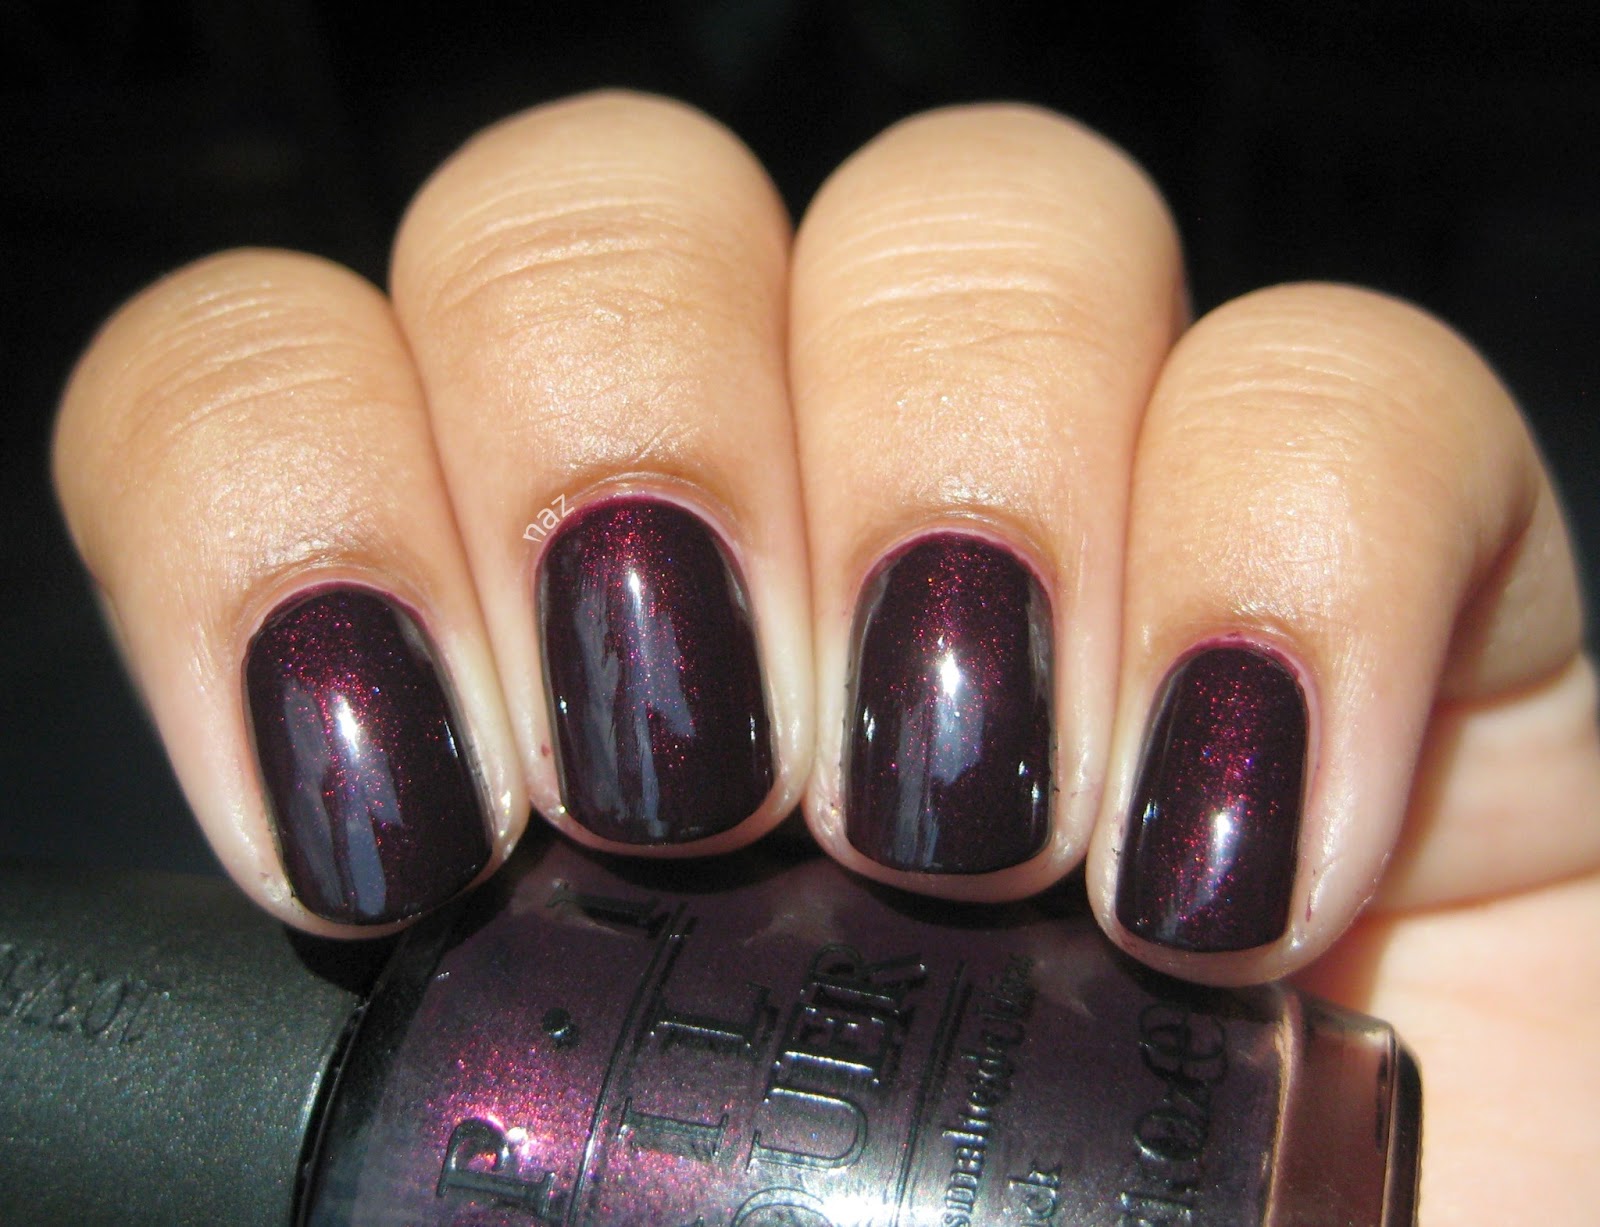 OPI Nail Lacquer in "Black Cherry Chutney" - wide 9